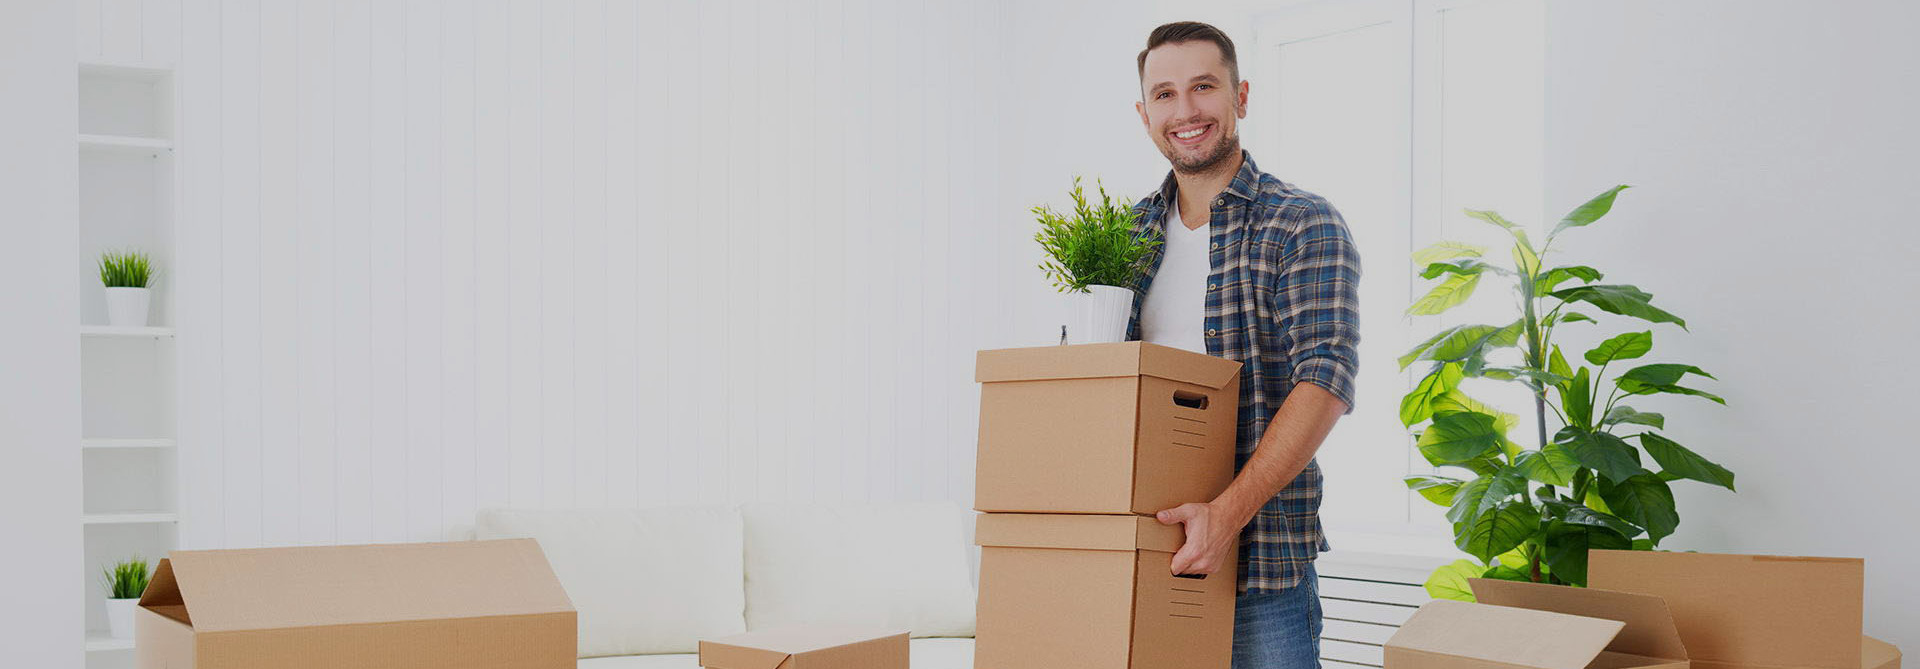 Packers and movers for Relocating services